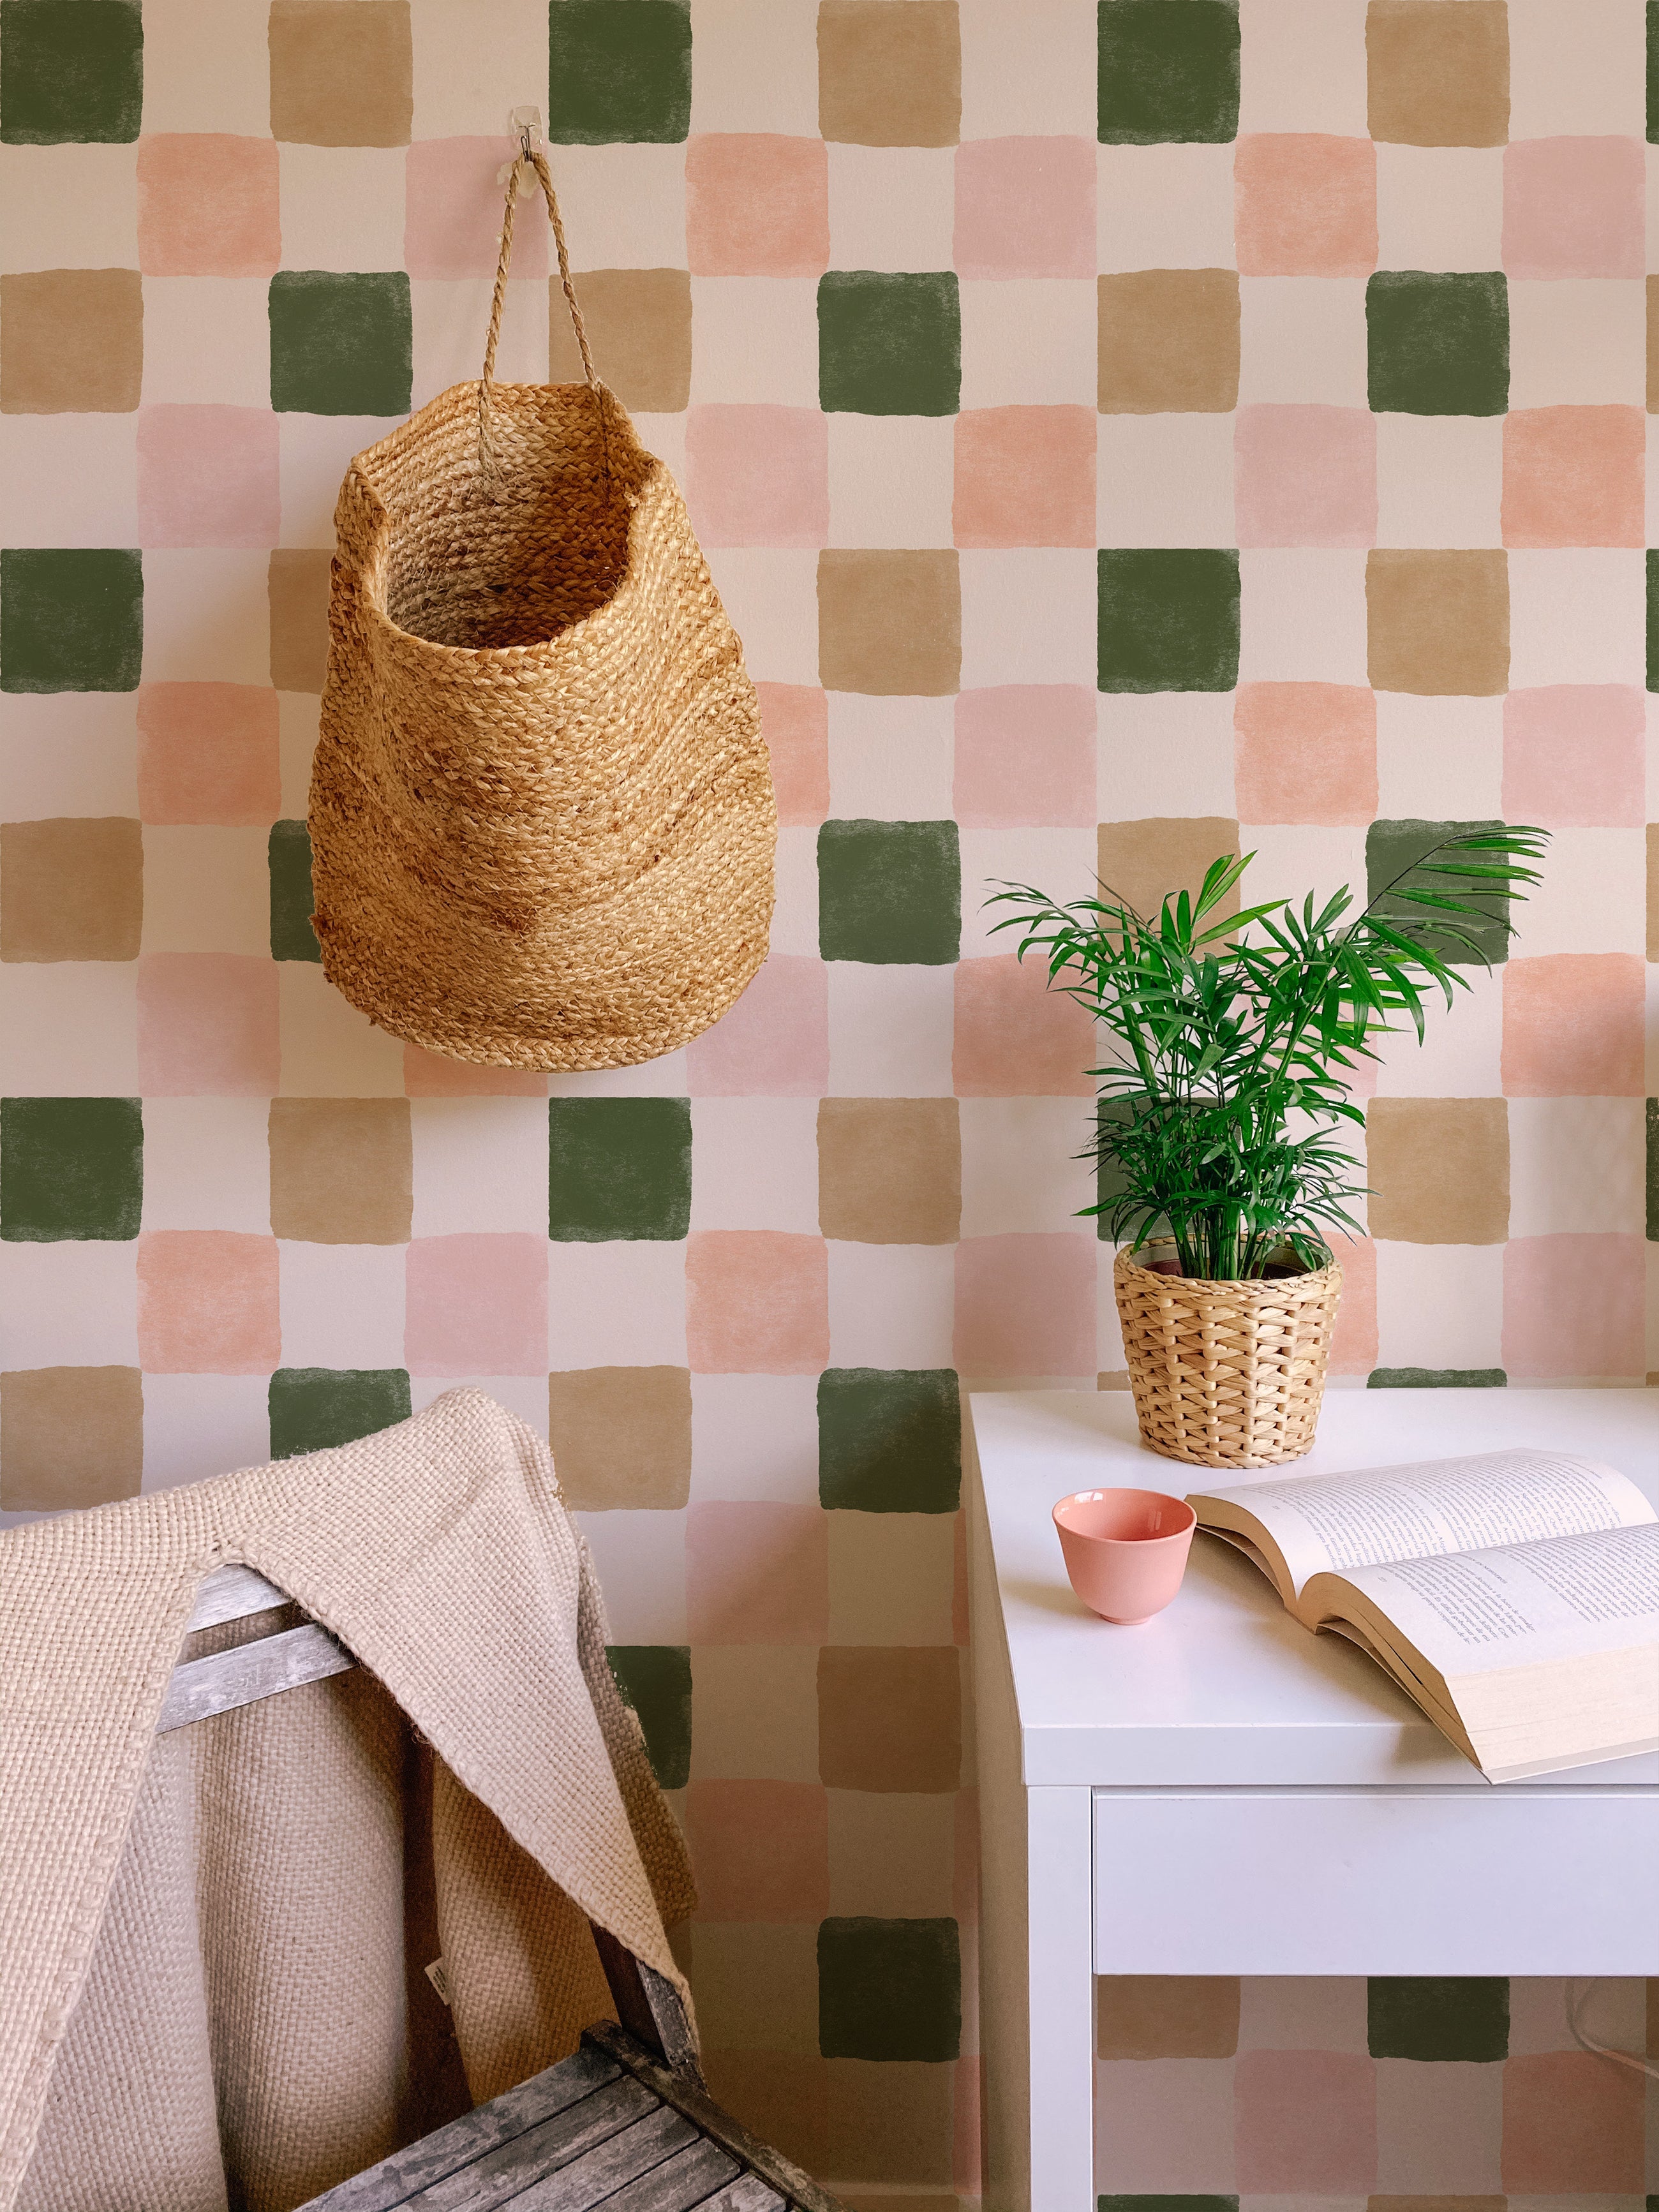 A cozy corner with Clémence Wallpaper II on the wall, showing the checkered pattern in green, beige, pink, and white. A wicker basket hangs on the wall, and a small potted plant sits on a white desk with an open book and a pink cup.